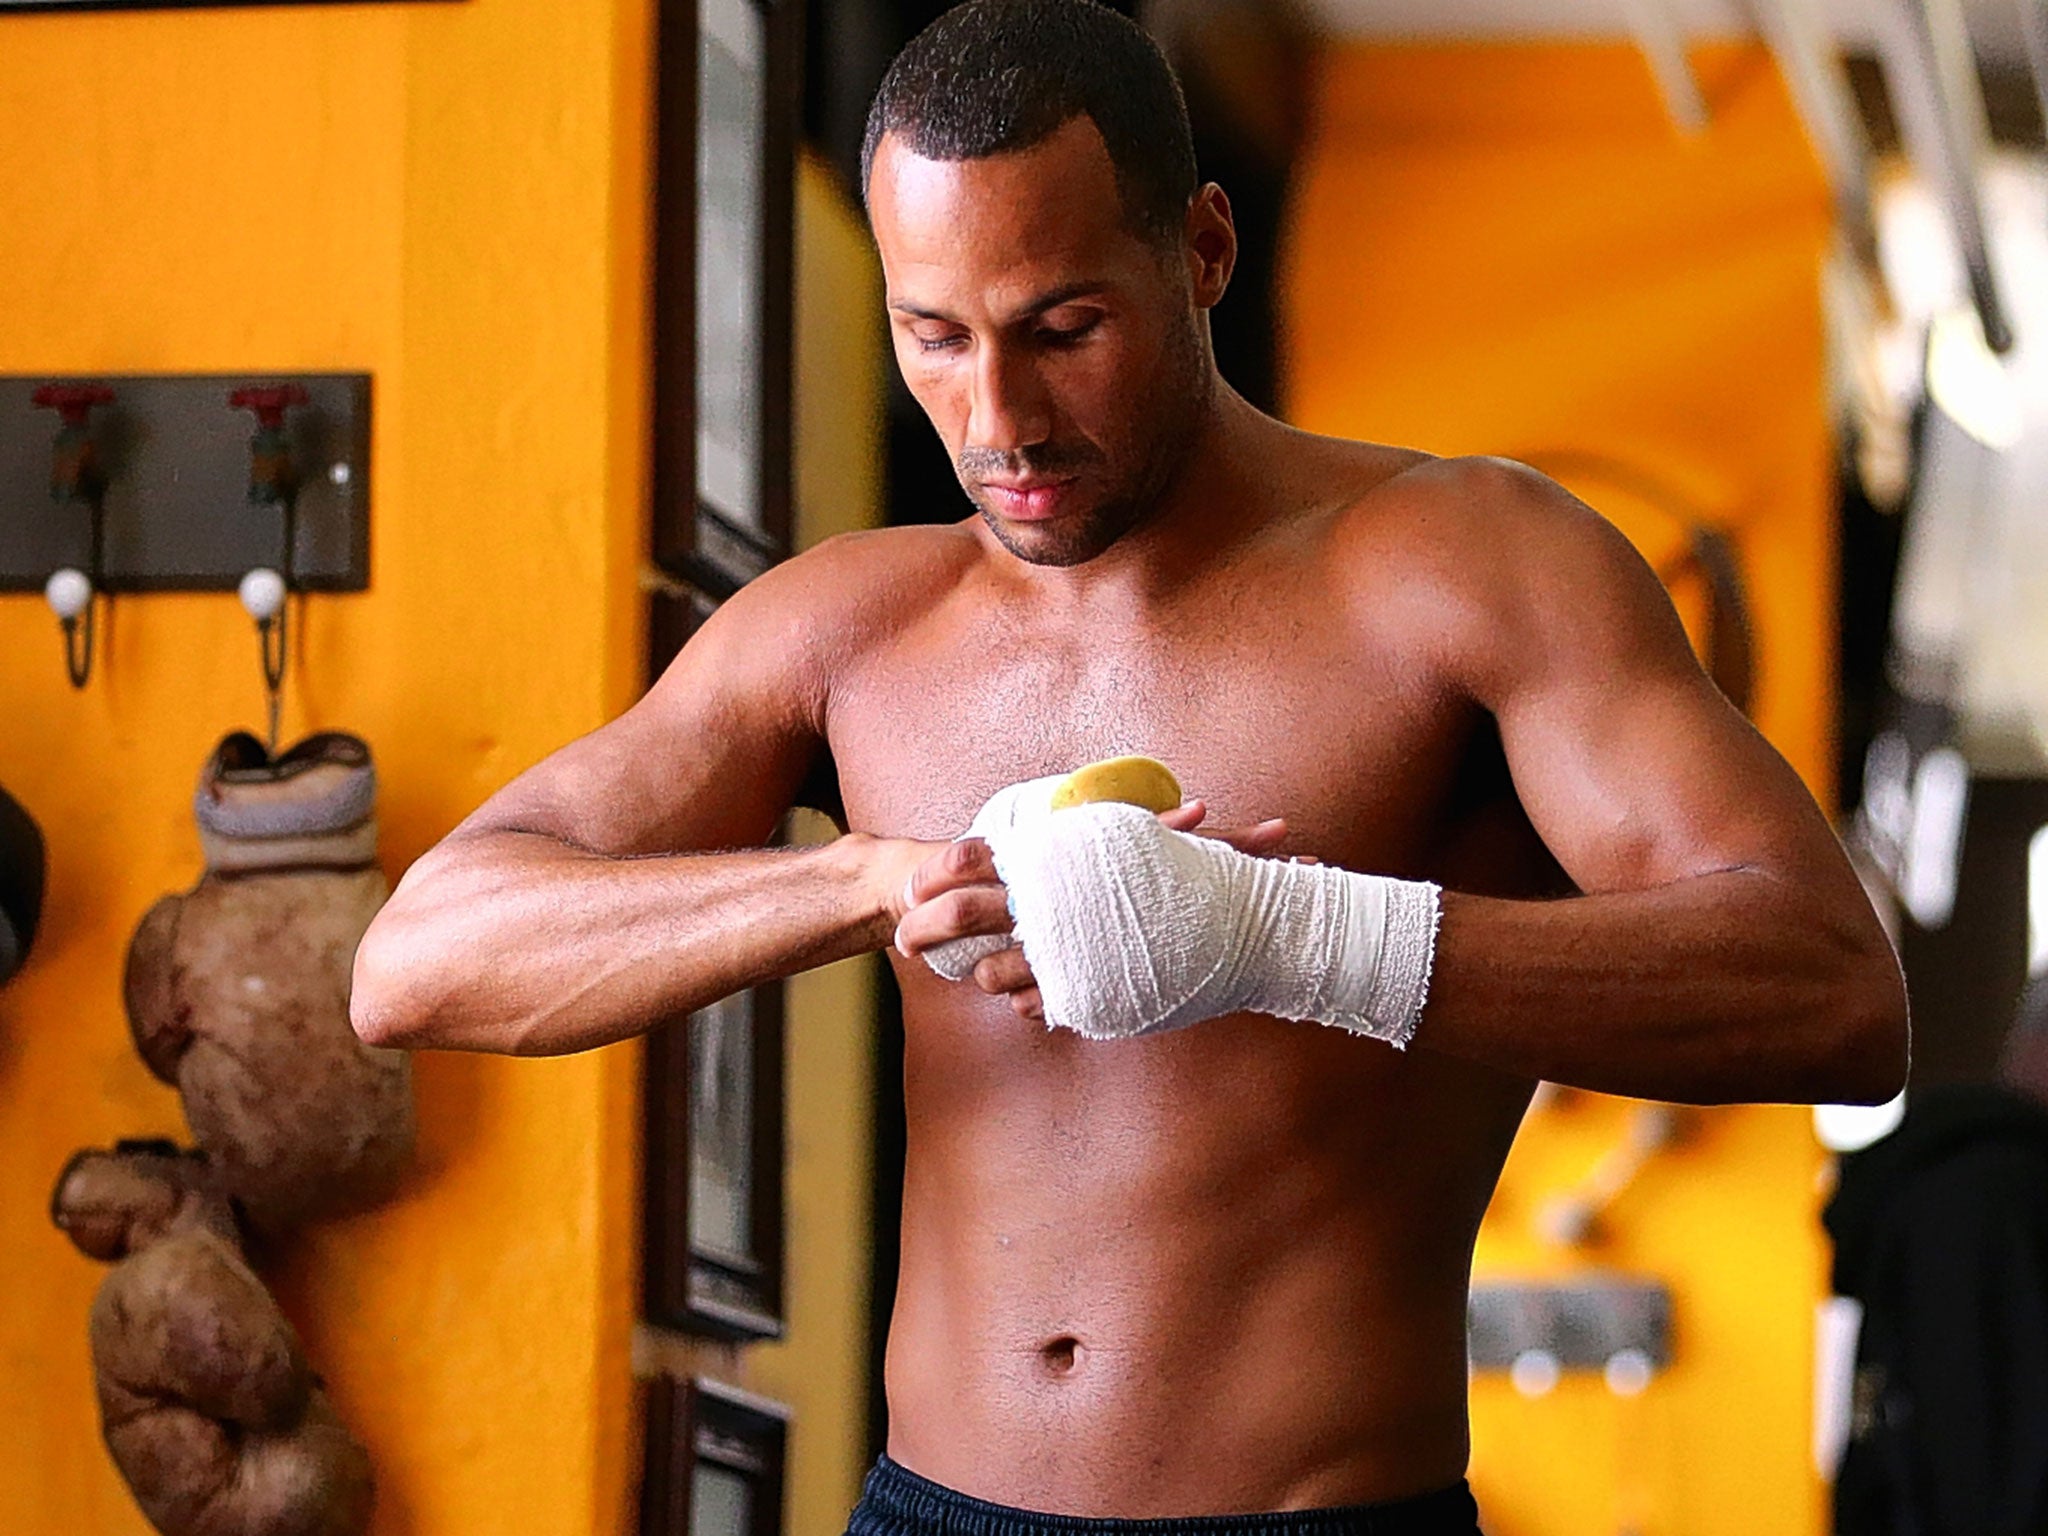 James DeGale straps up his hands during a training session ahead of Saturday’s fight in Boston